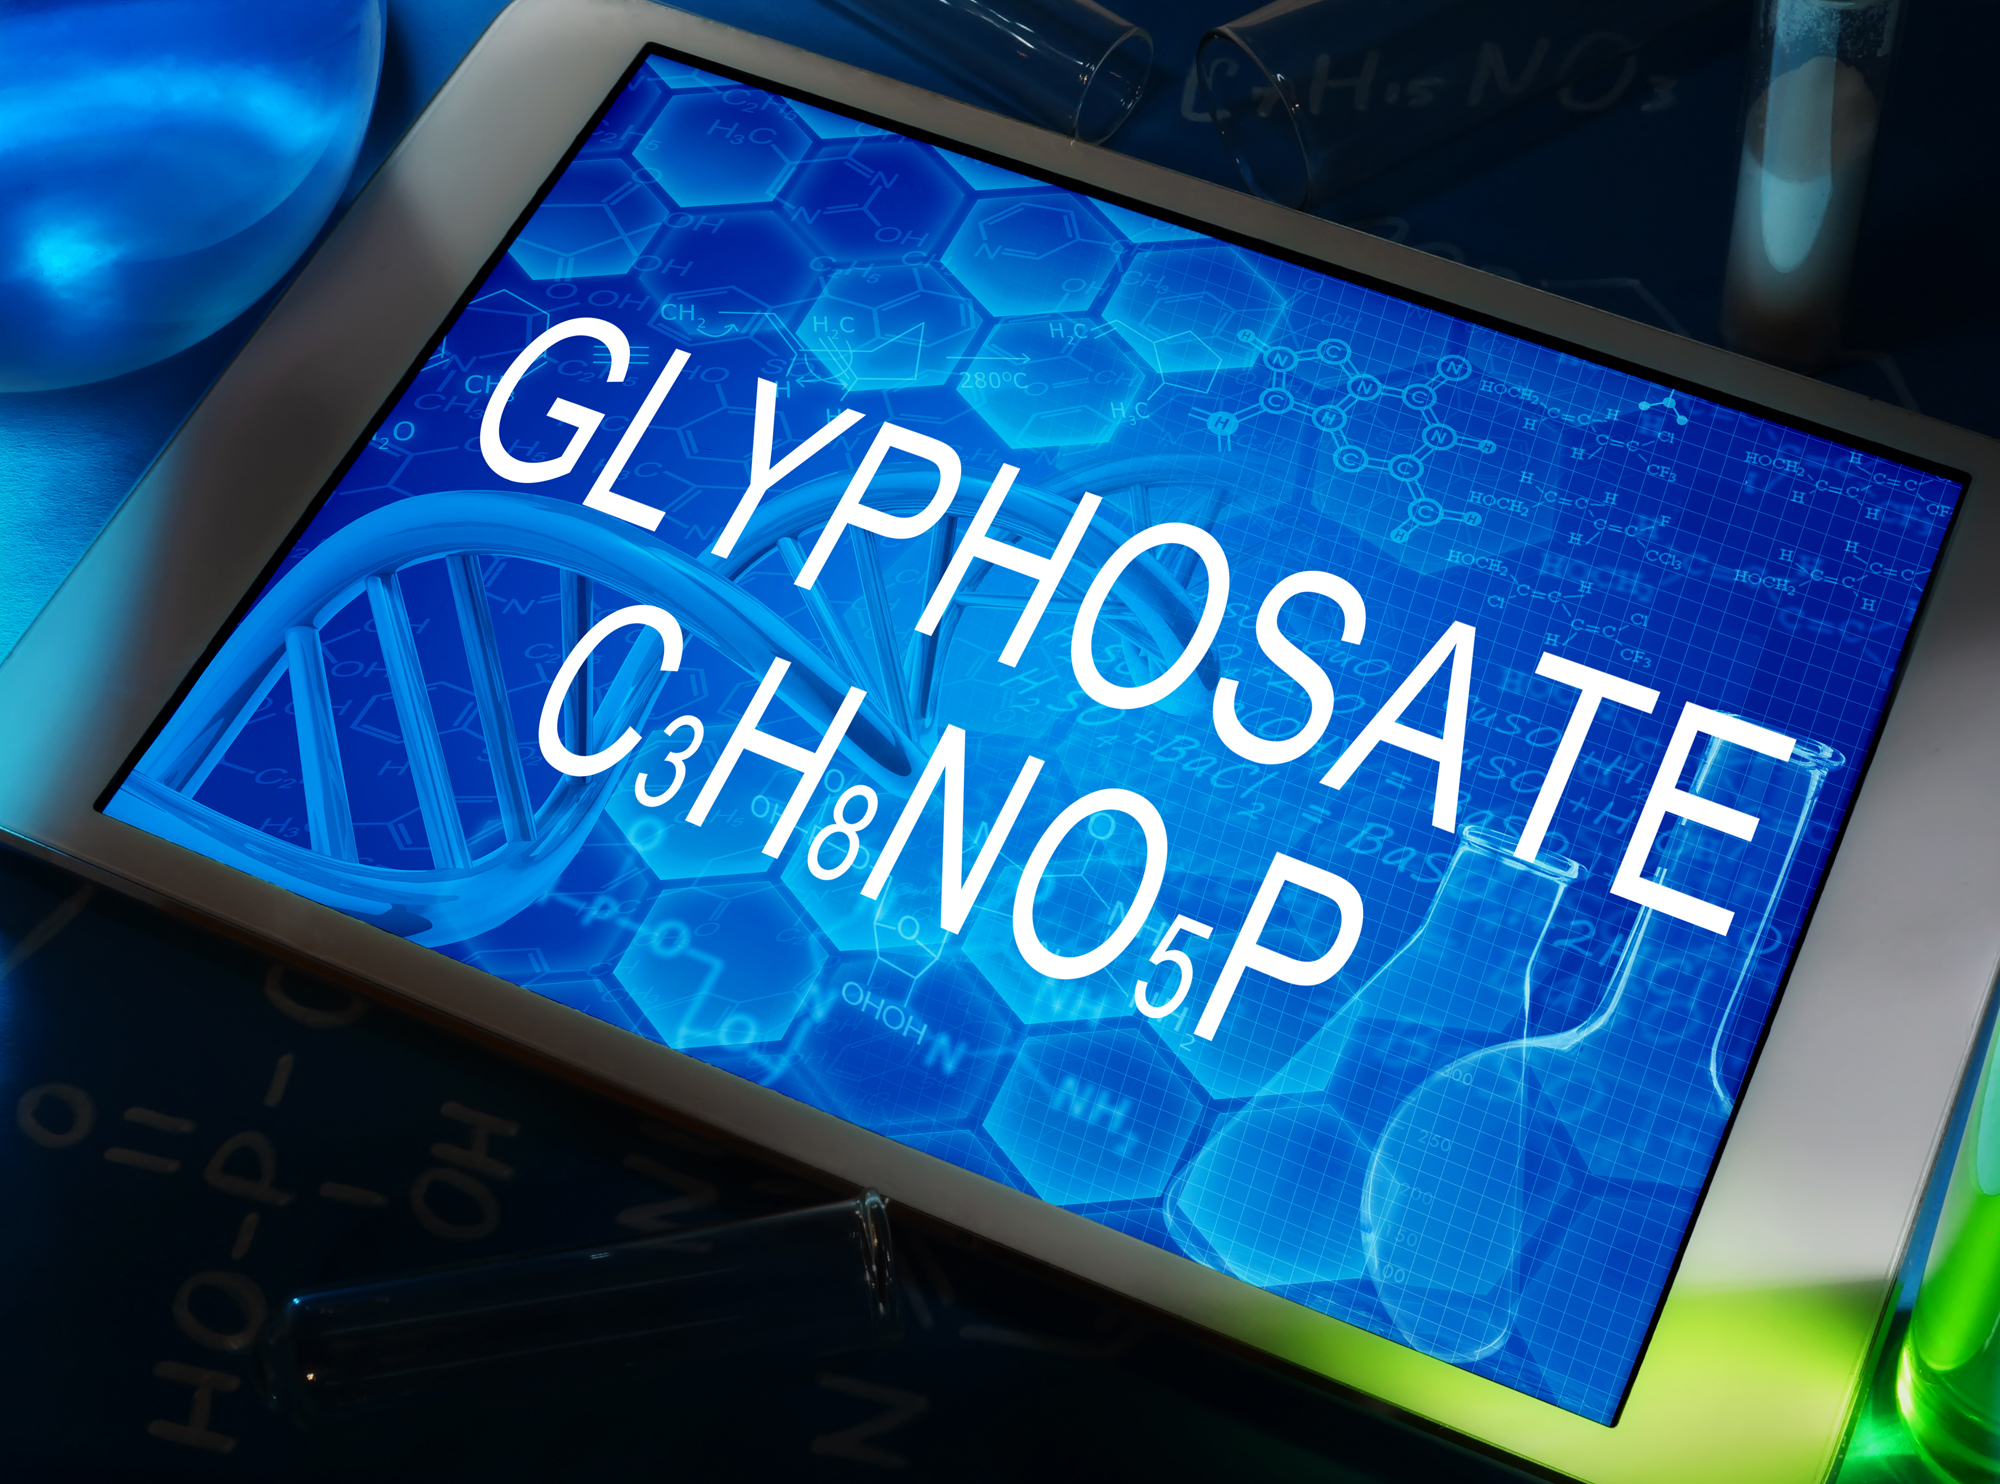 Testing and treating your body for glyphosate